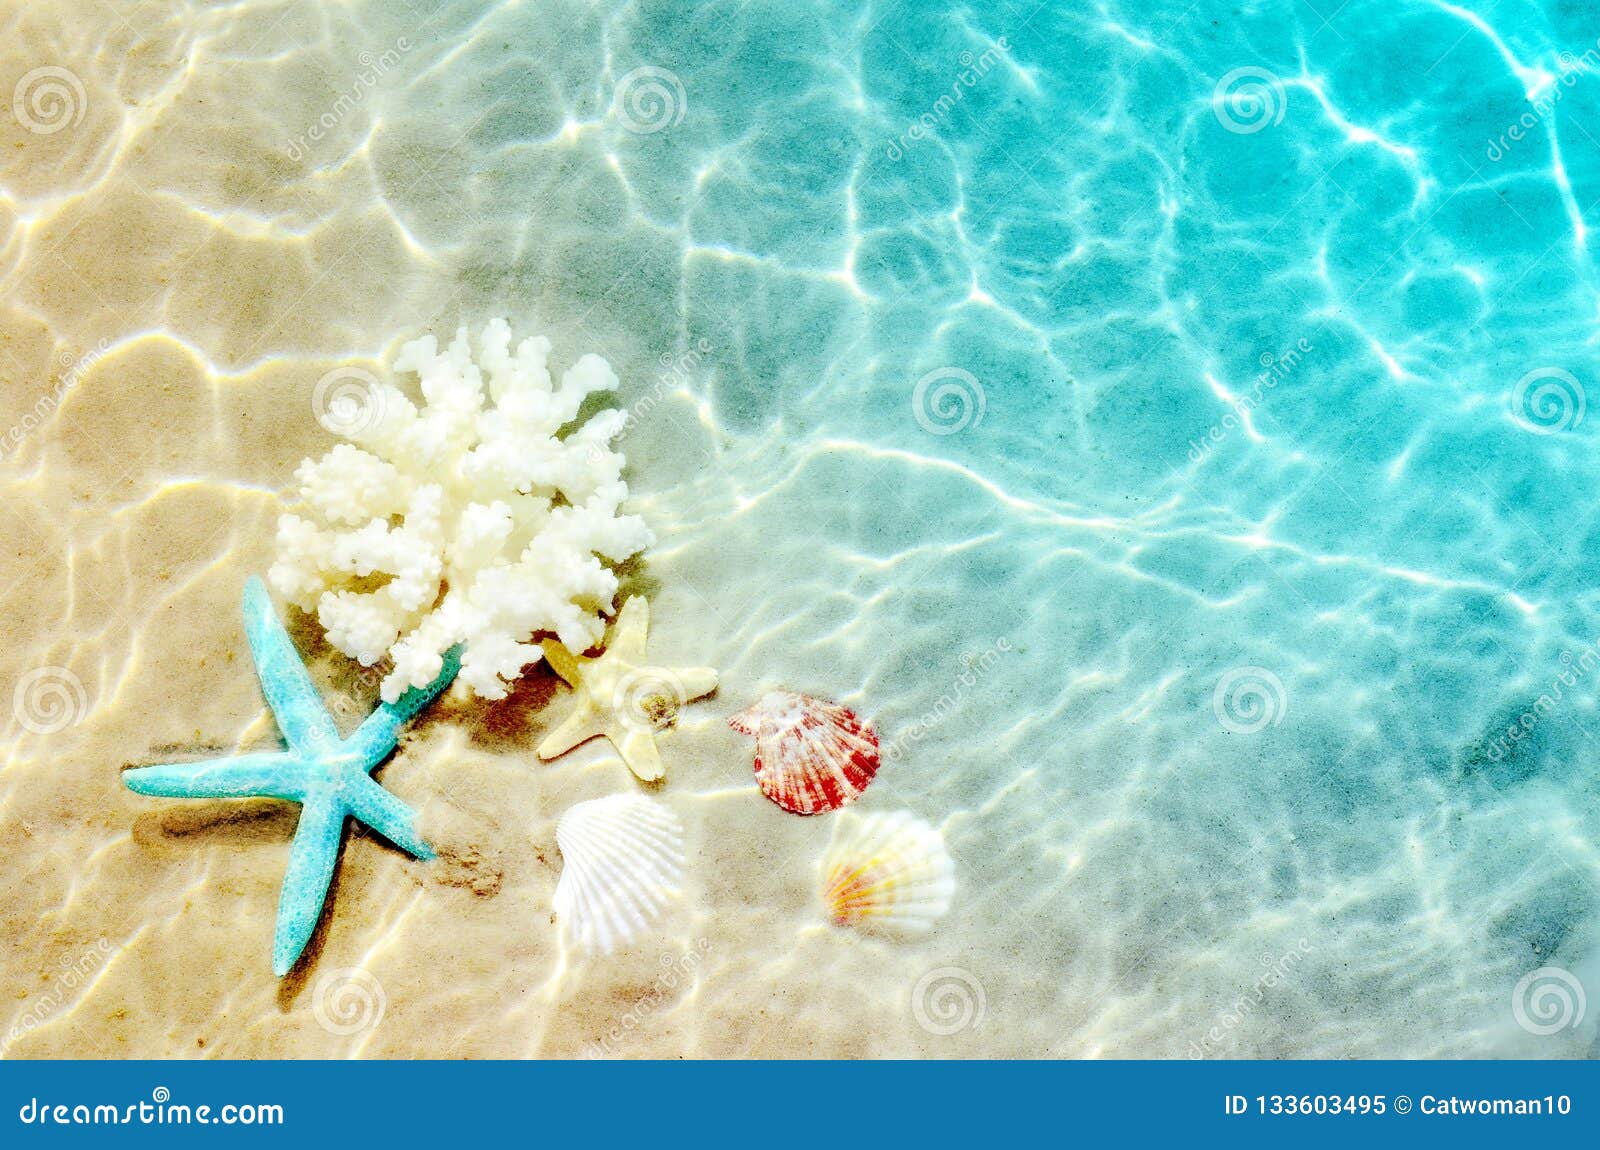 Starfish and Seashell on the Summer Beach in Sea Water. Summer Background.  Summer Time. Stock Image - Image of background, landscape: 133603495